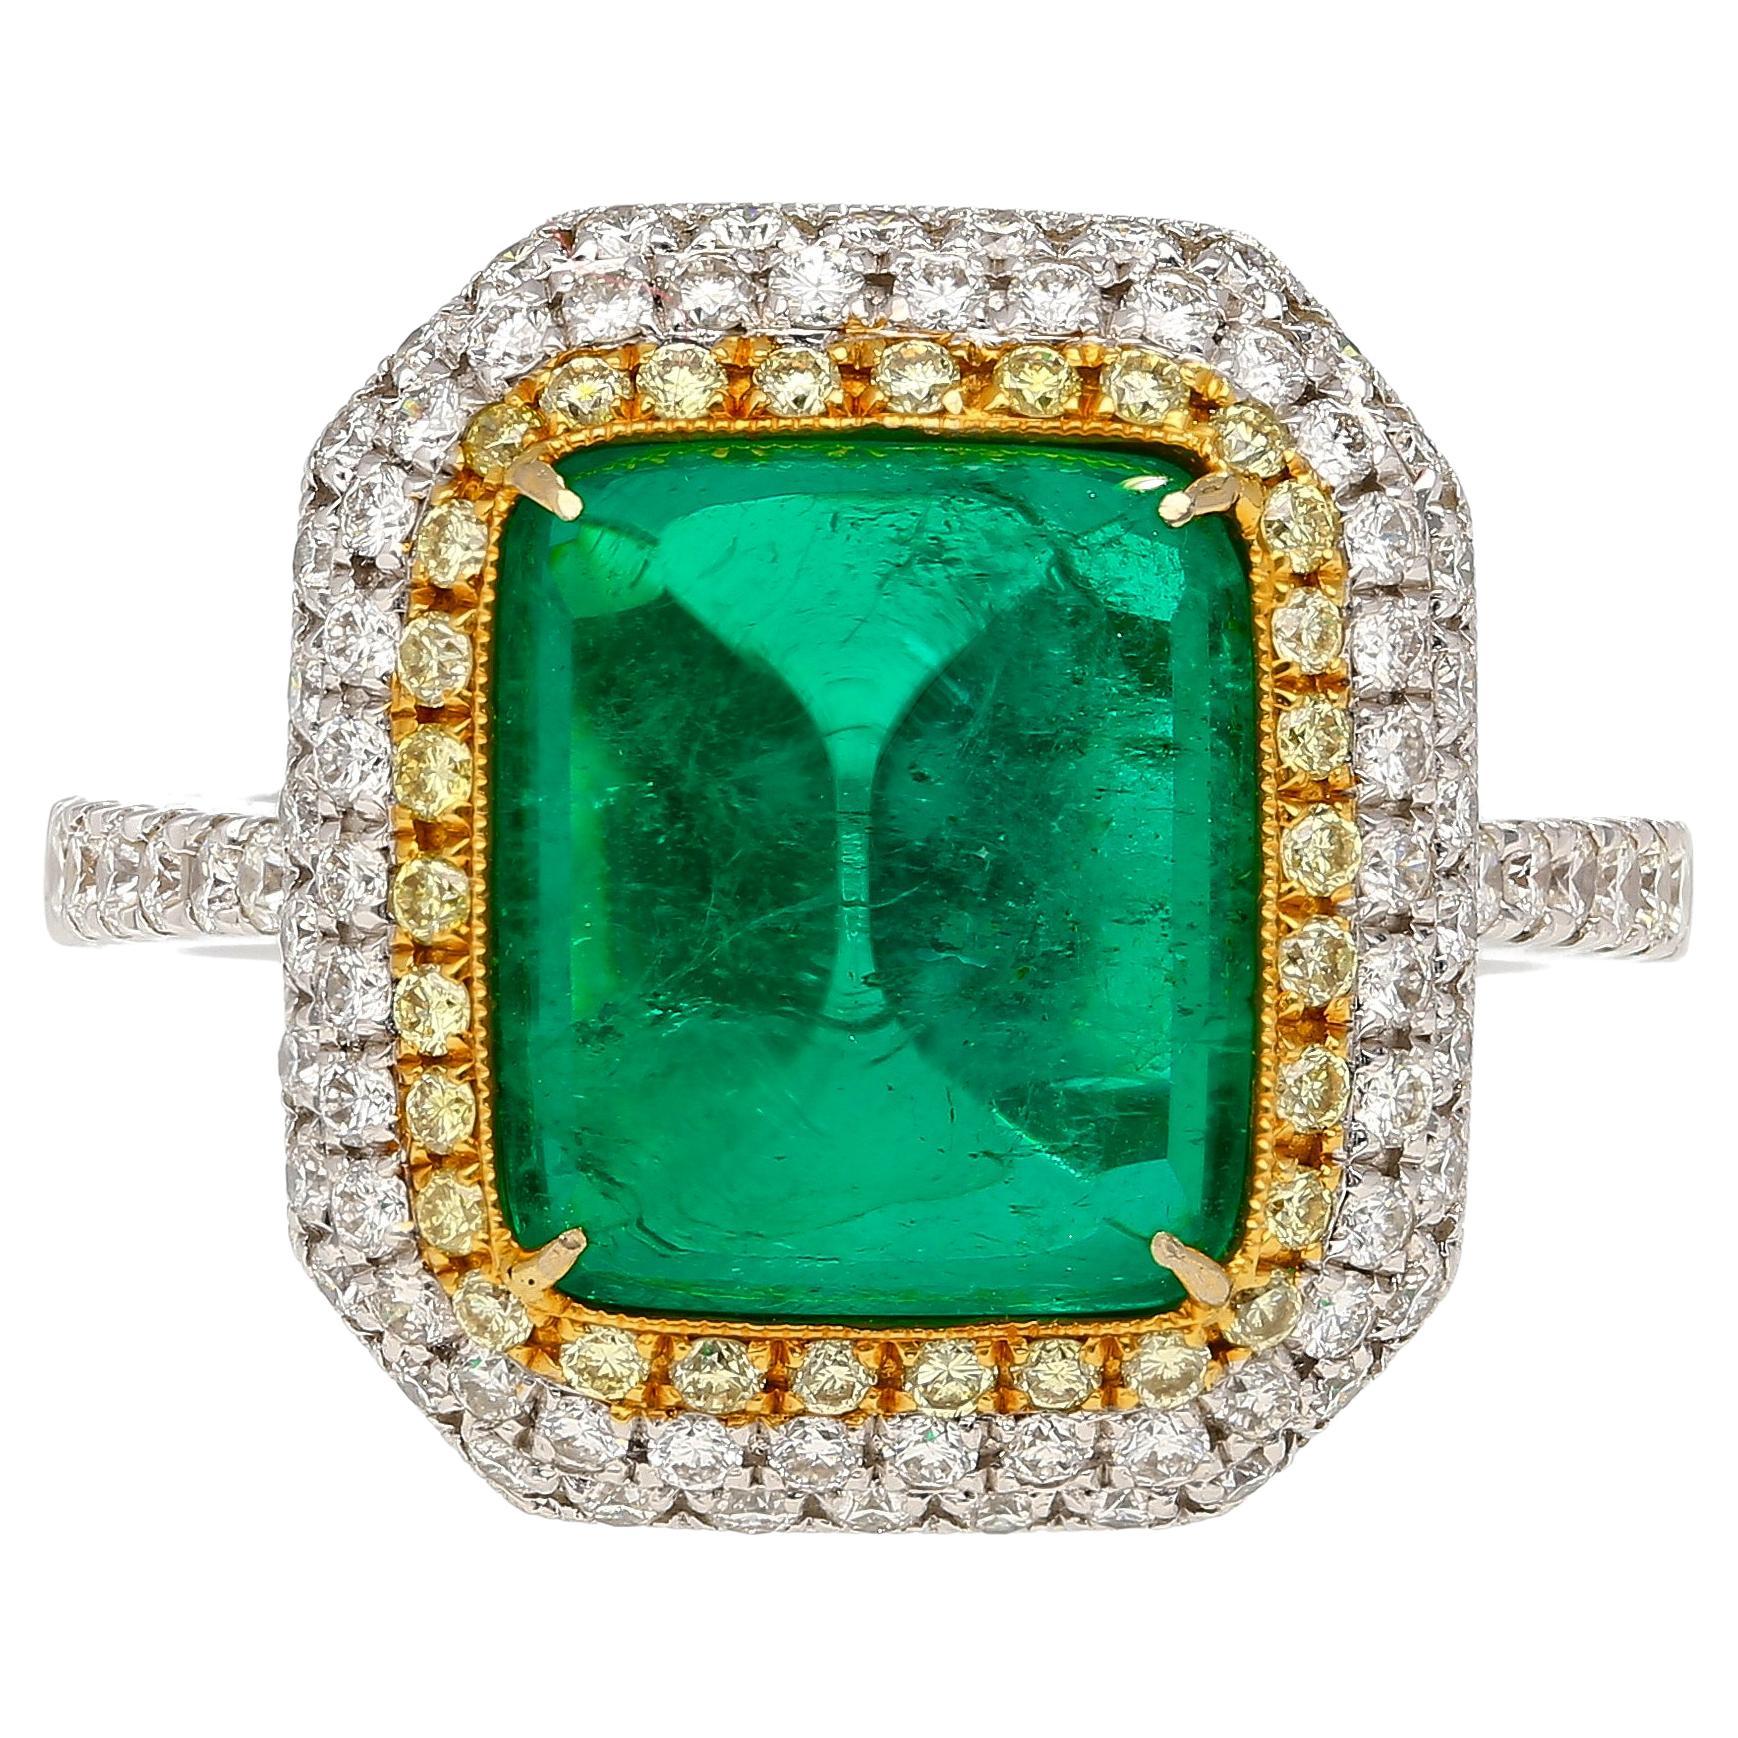 4.49 Carat Sugarloaf Cabochon Cut Colombian Emerald and Double Diamond Halo Ring